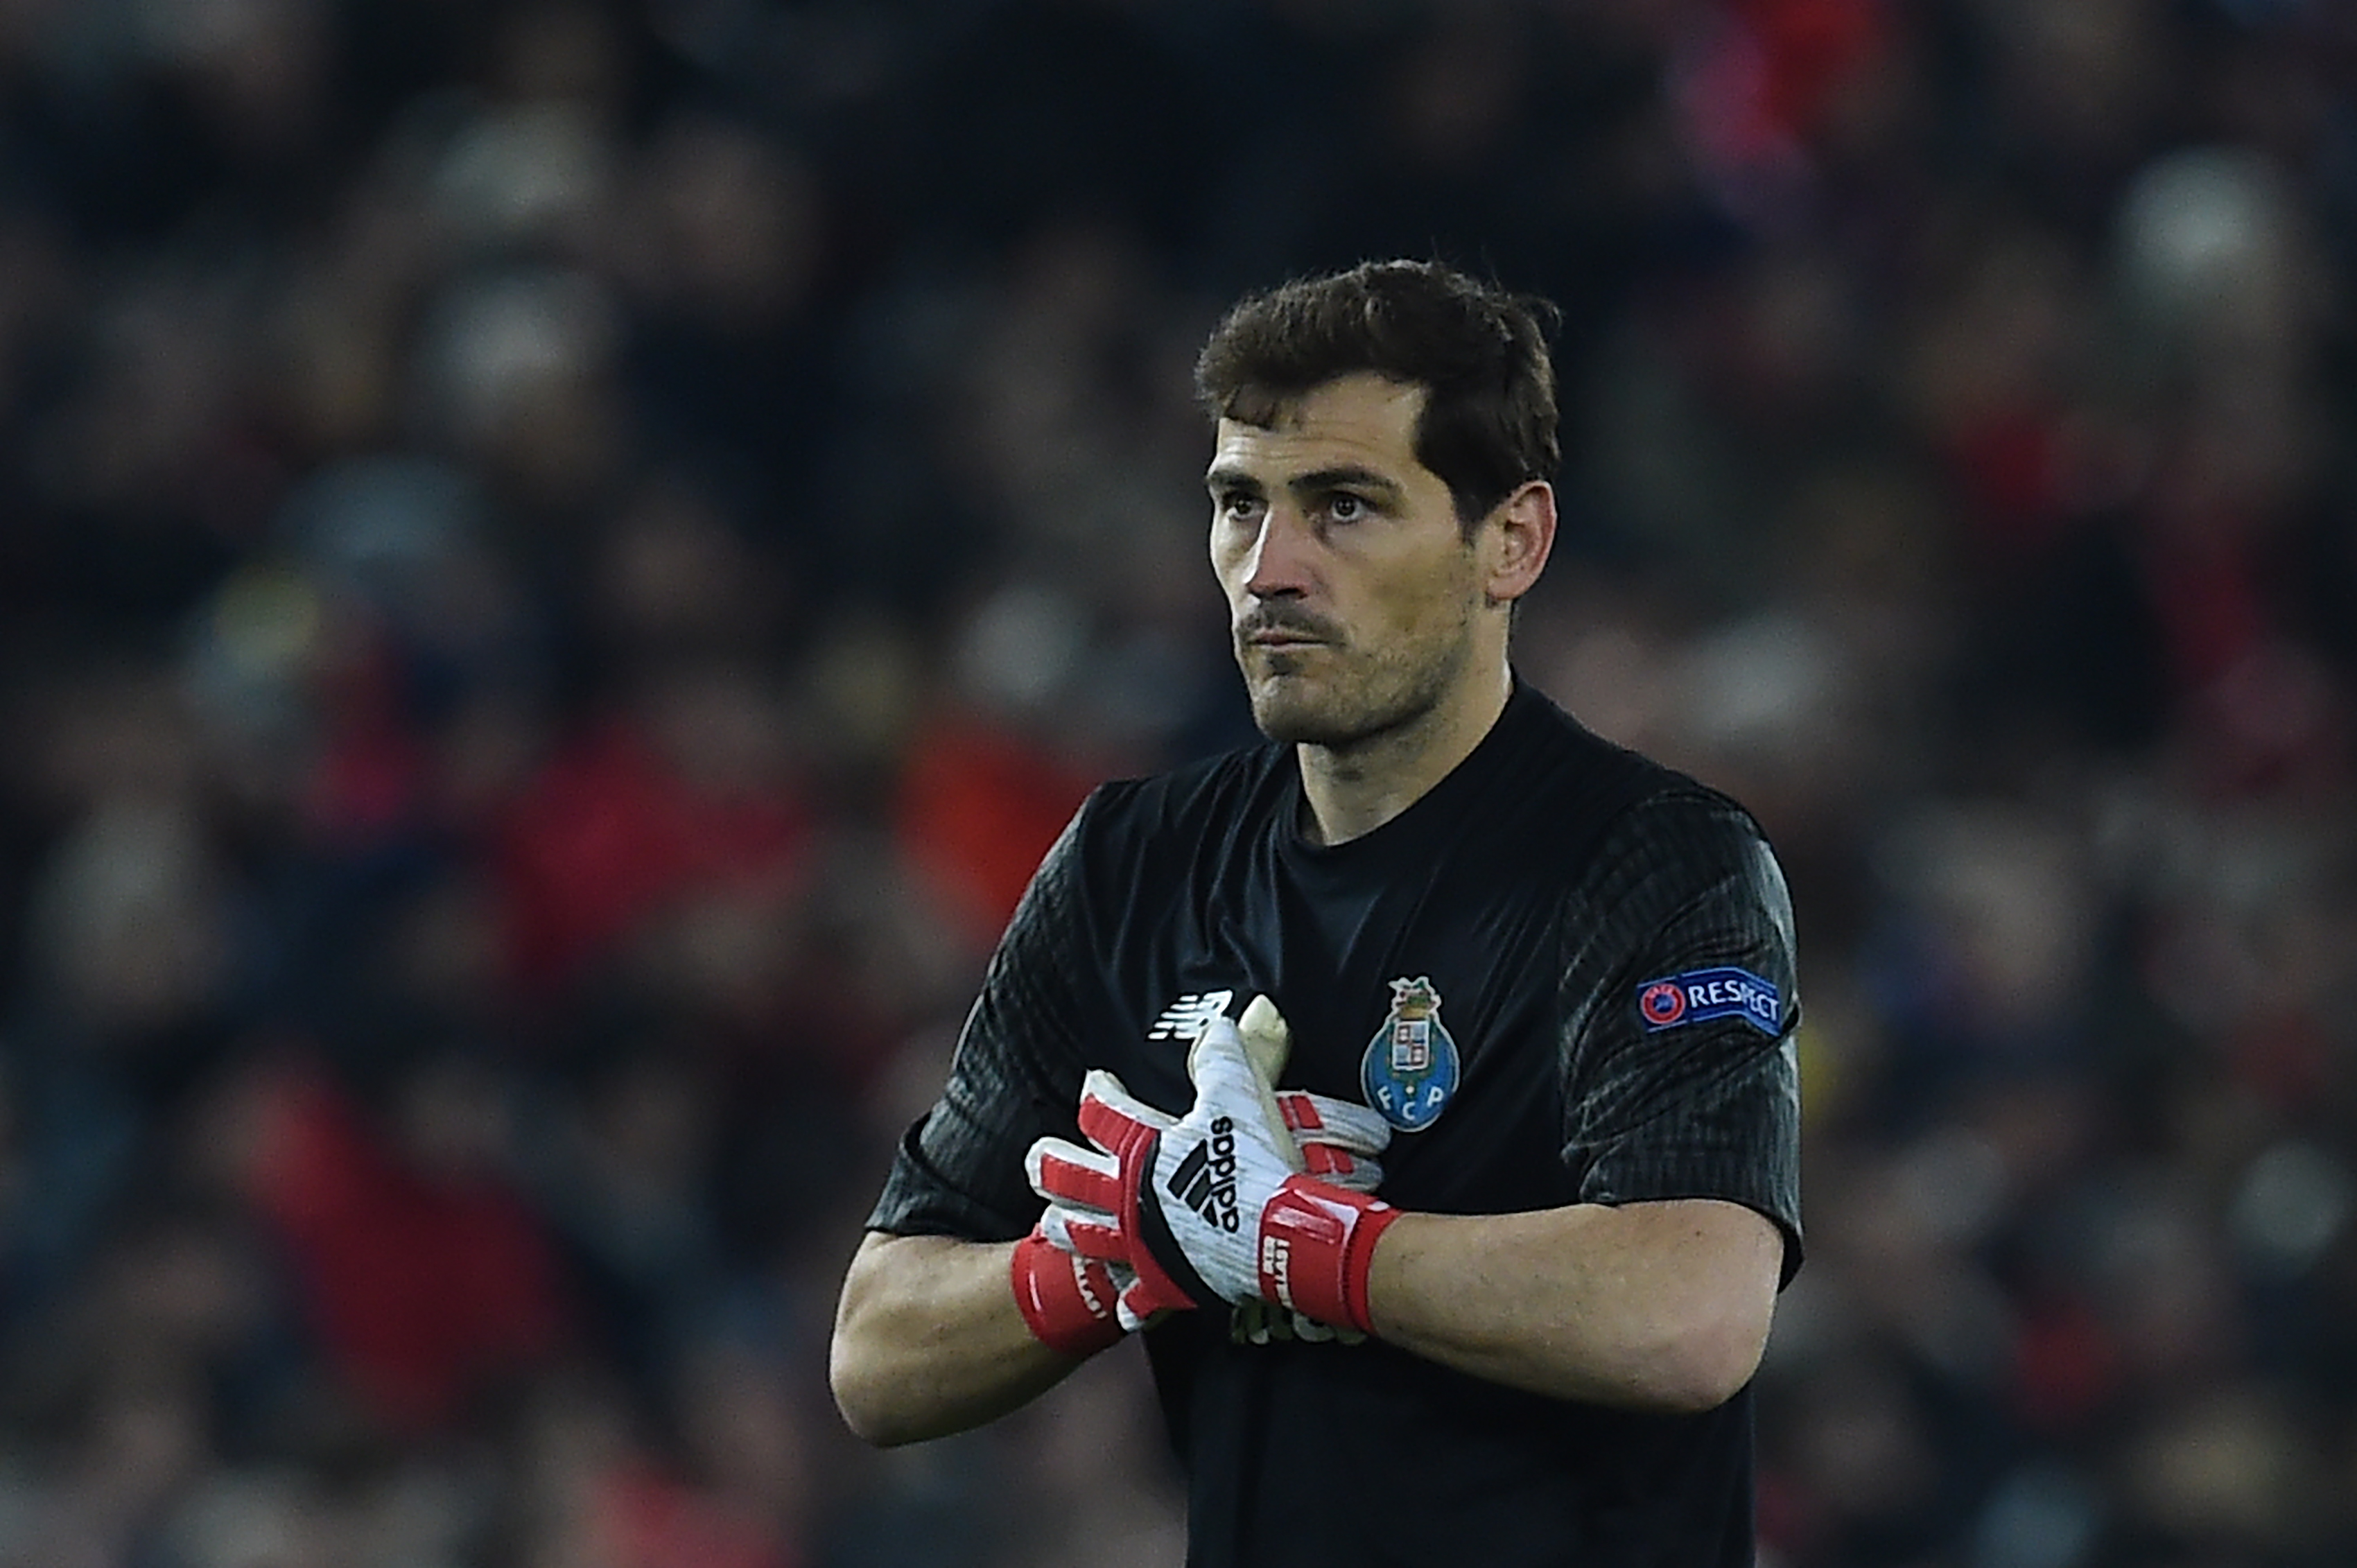 Porto's Spanish goalkeeper Iker Casillas gestures during the UEFA Champions League round of sixteen second leg football match between Liverpool and FC Porto at Anfield in Liverpool, north-west England on March 6, 2018. / AFP PHOTO / PAUL ELLIS        (Photo credit should read PAUL ELLIS/AFP/Getty Images)